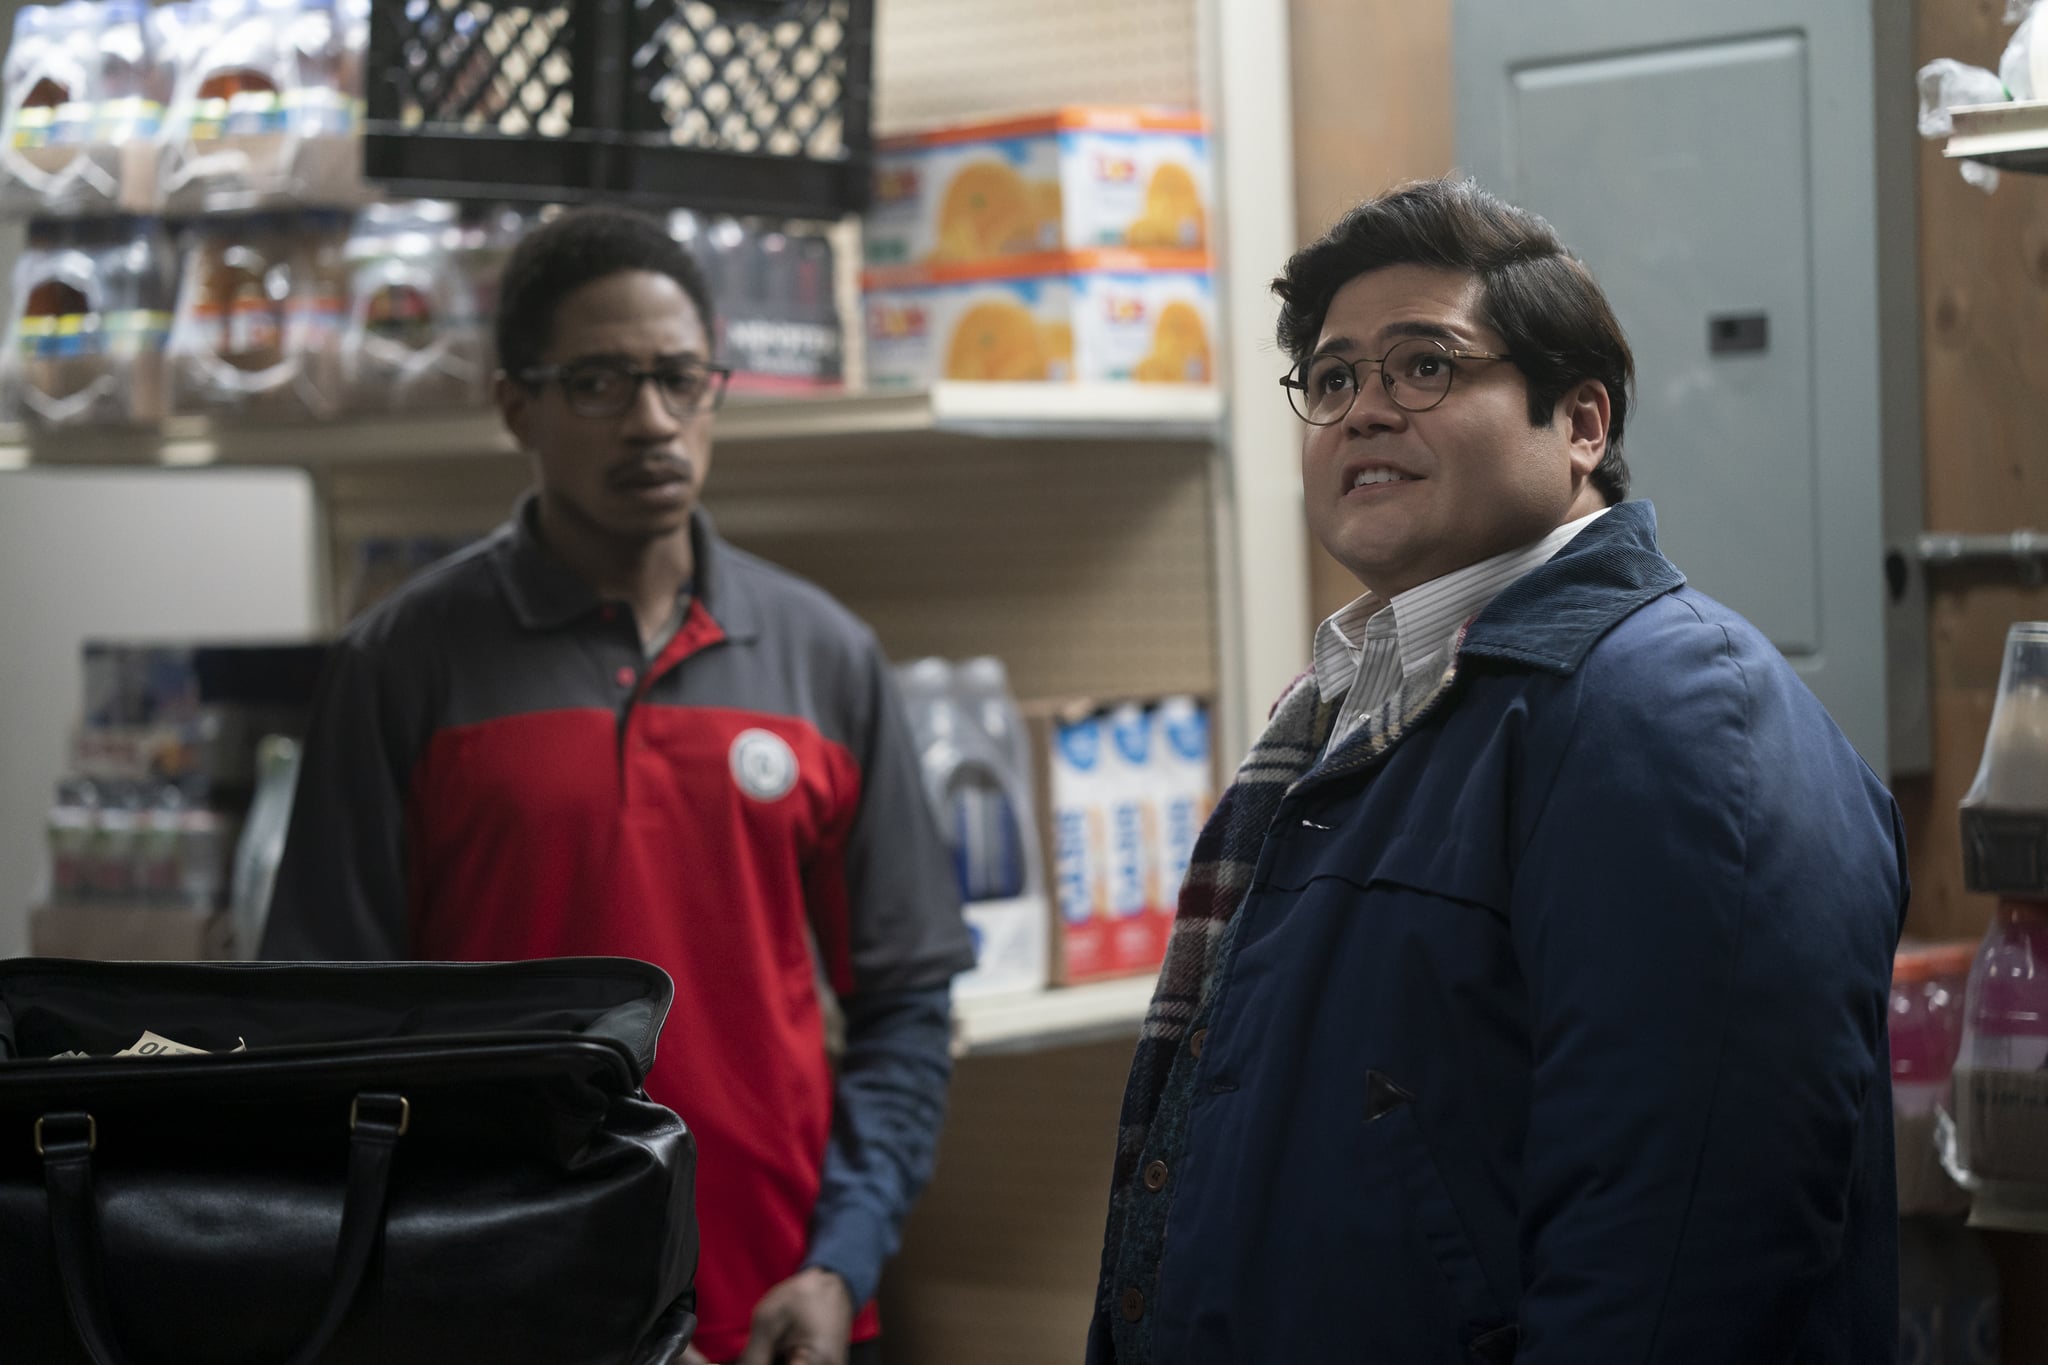 WHAT WE DO IN THE SHADOWS -- The Mall --  Season 5, Episode 1 (Airs July 13) — Pictured (L-R): Chris Sandiford as Derek, Harvey Guillén as Guillermo.  CR: Russ Martin: FX